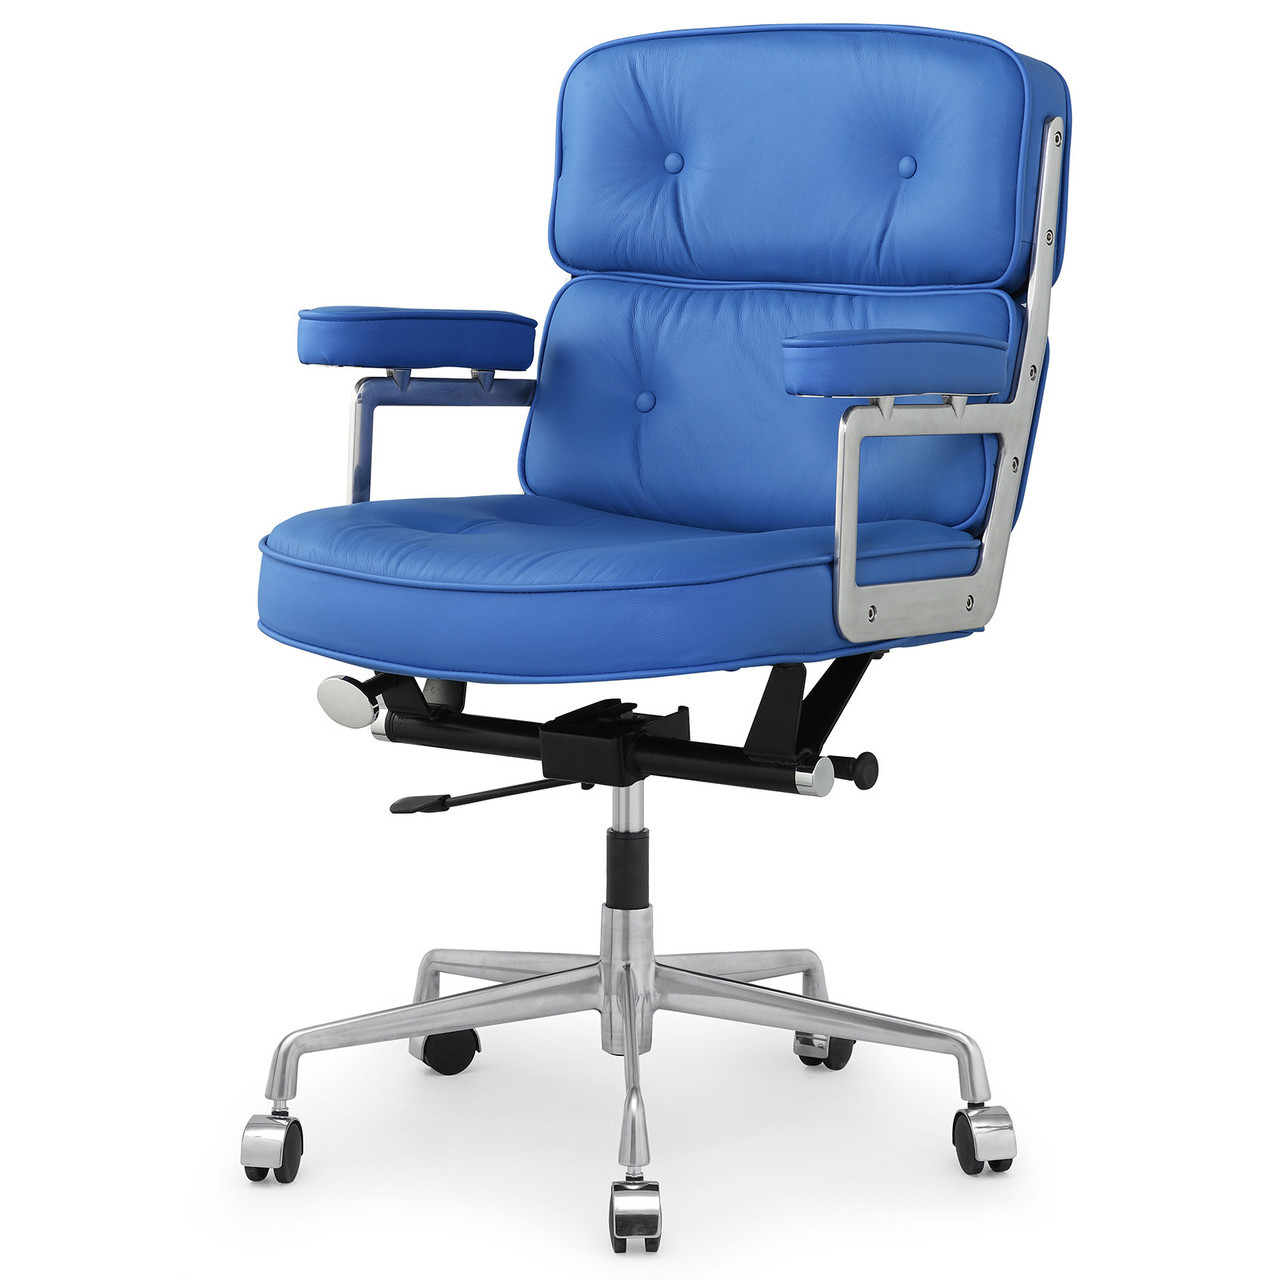 Blue Italian Leather M340 Executive Office Chair Zin Home